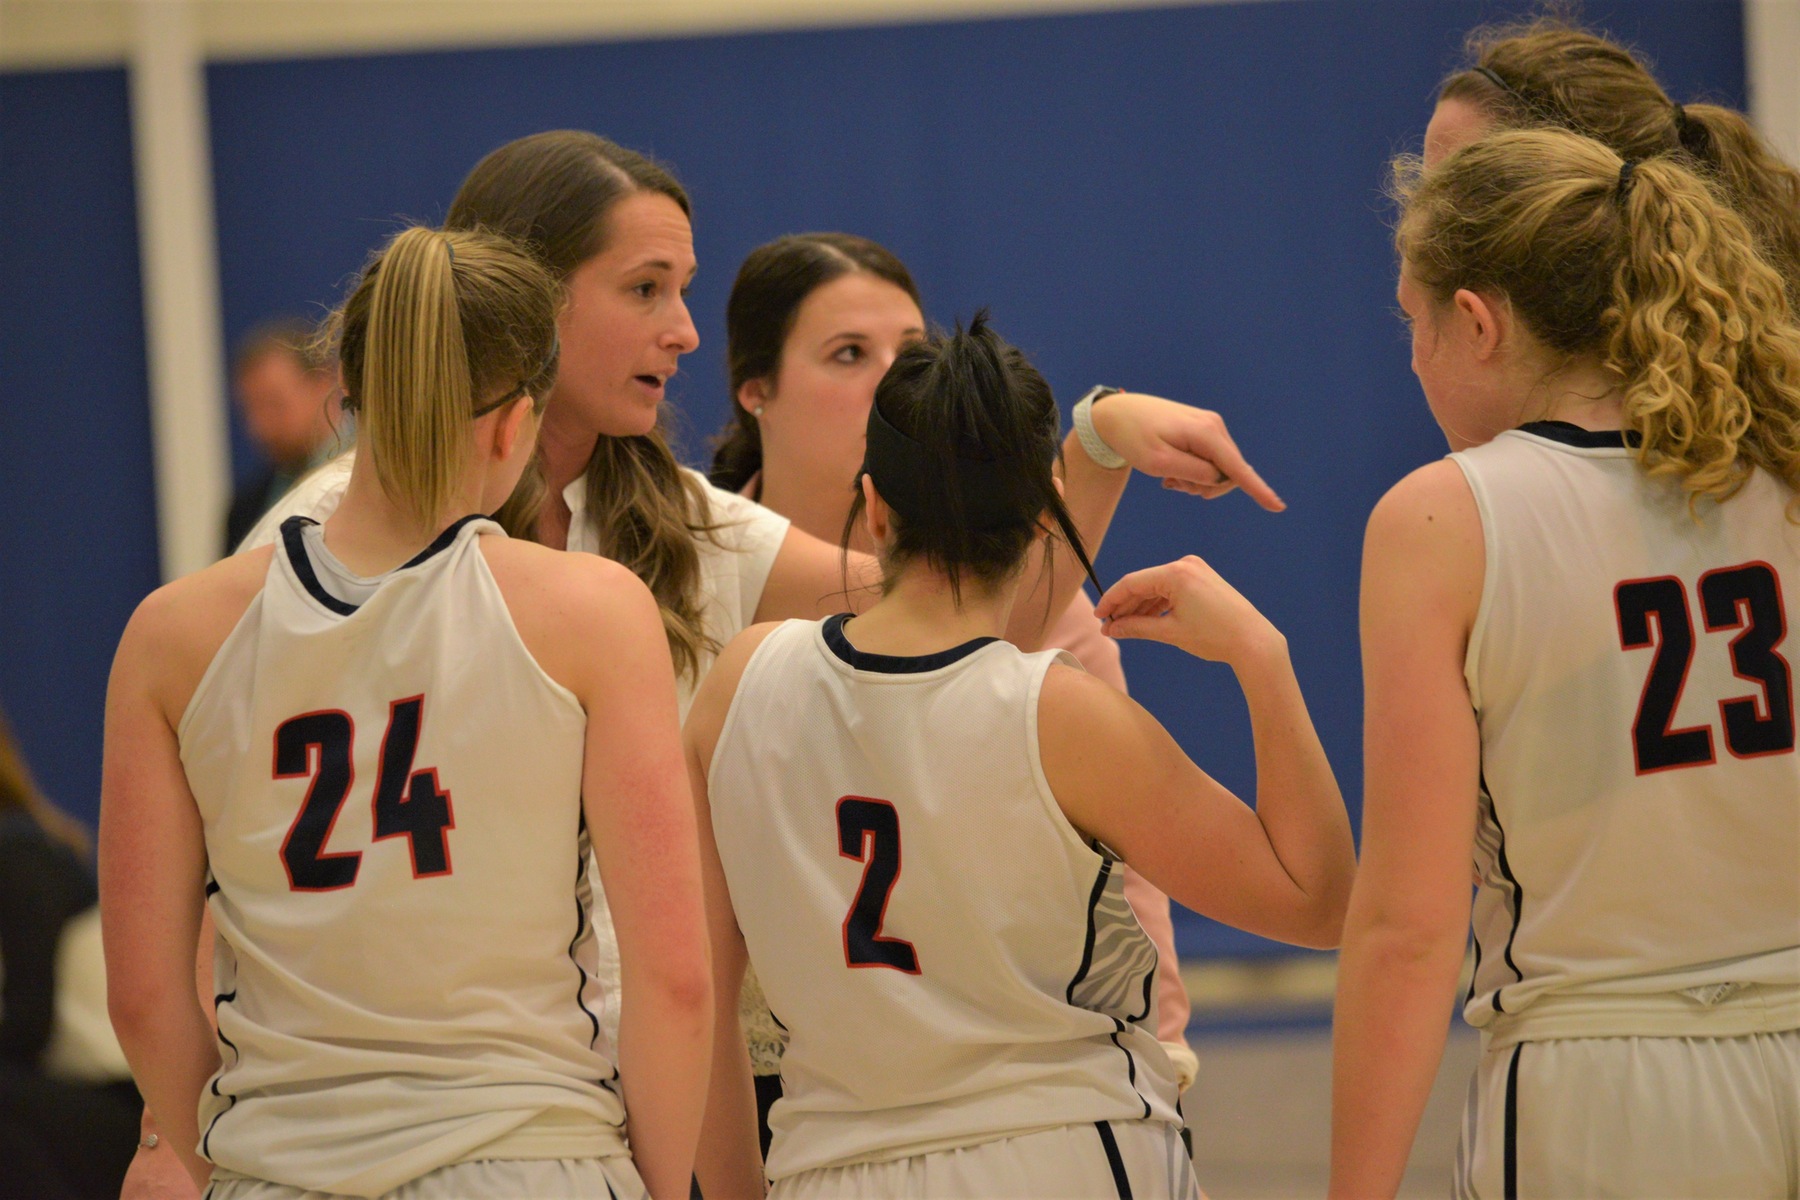 Lions Fall to Wittenberg in Behrend Tip-Off Tournament